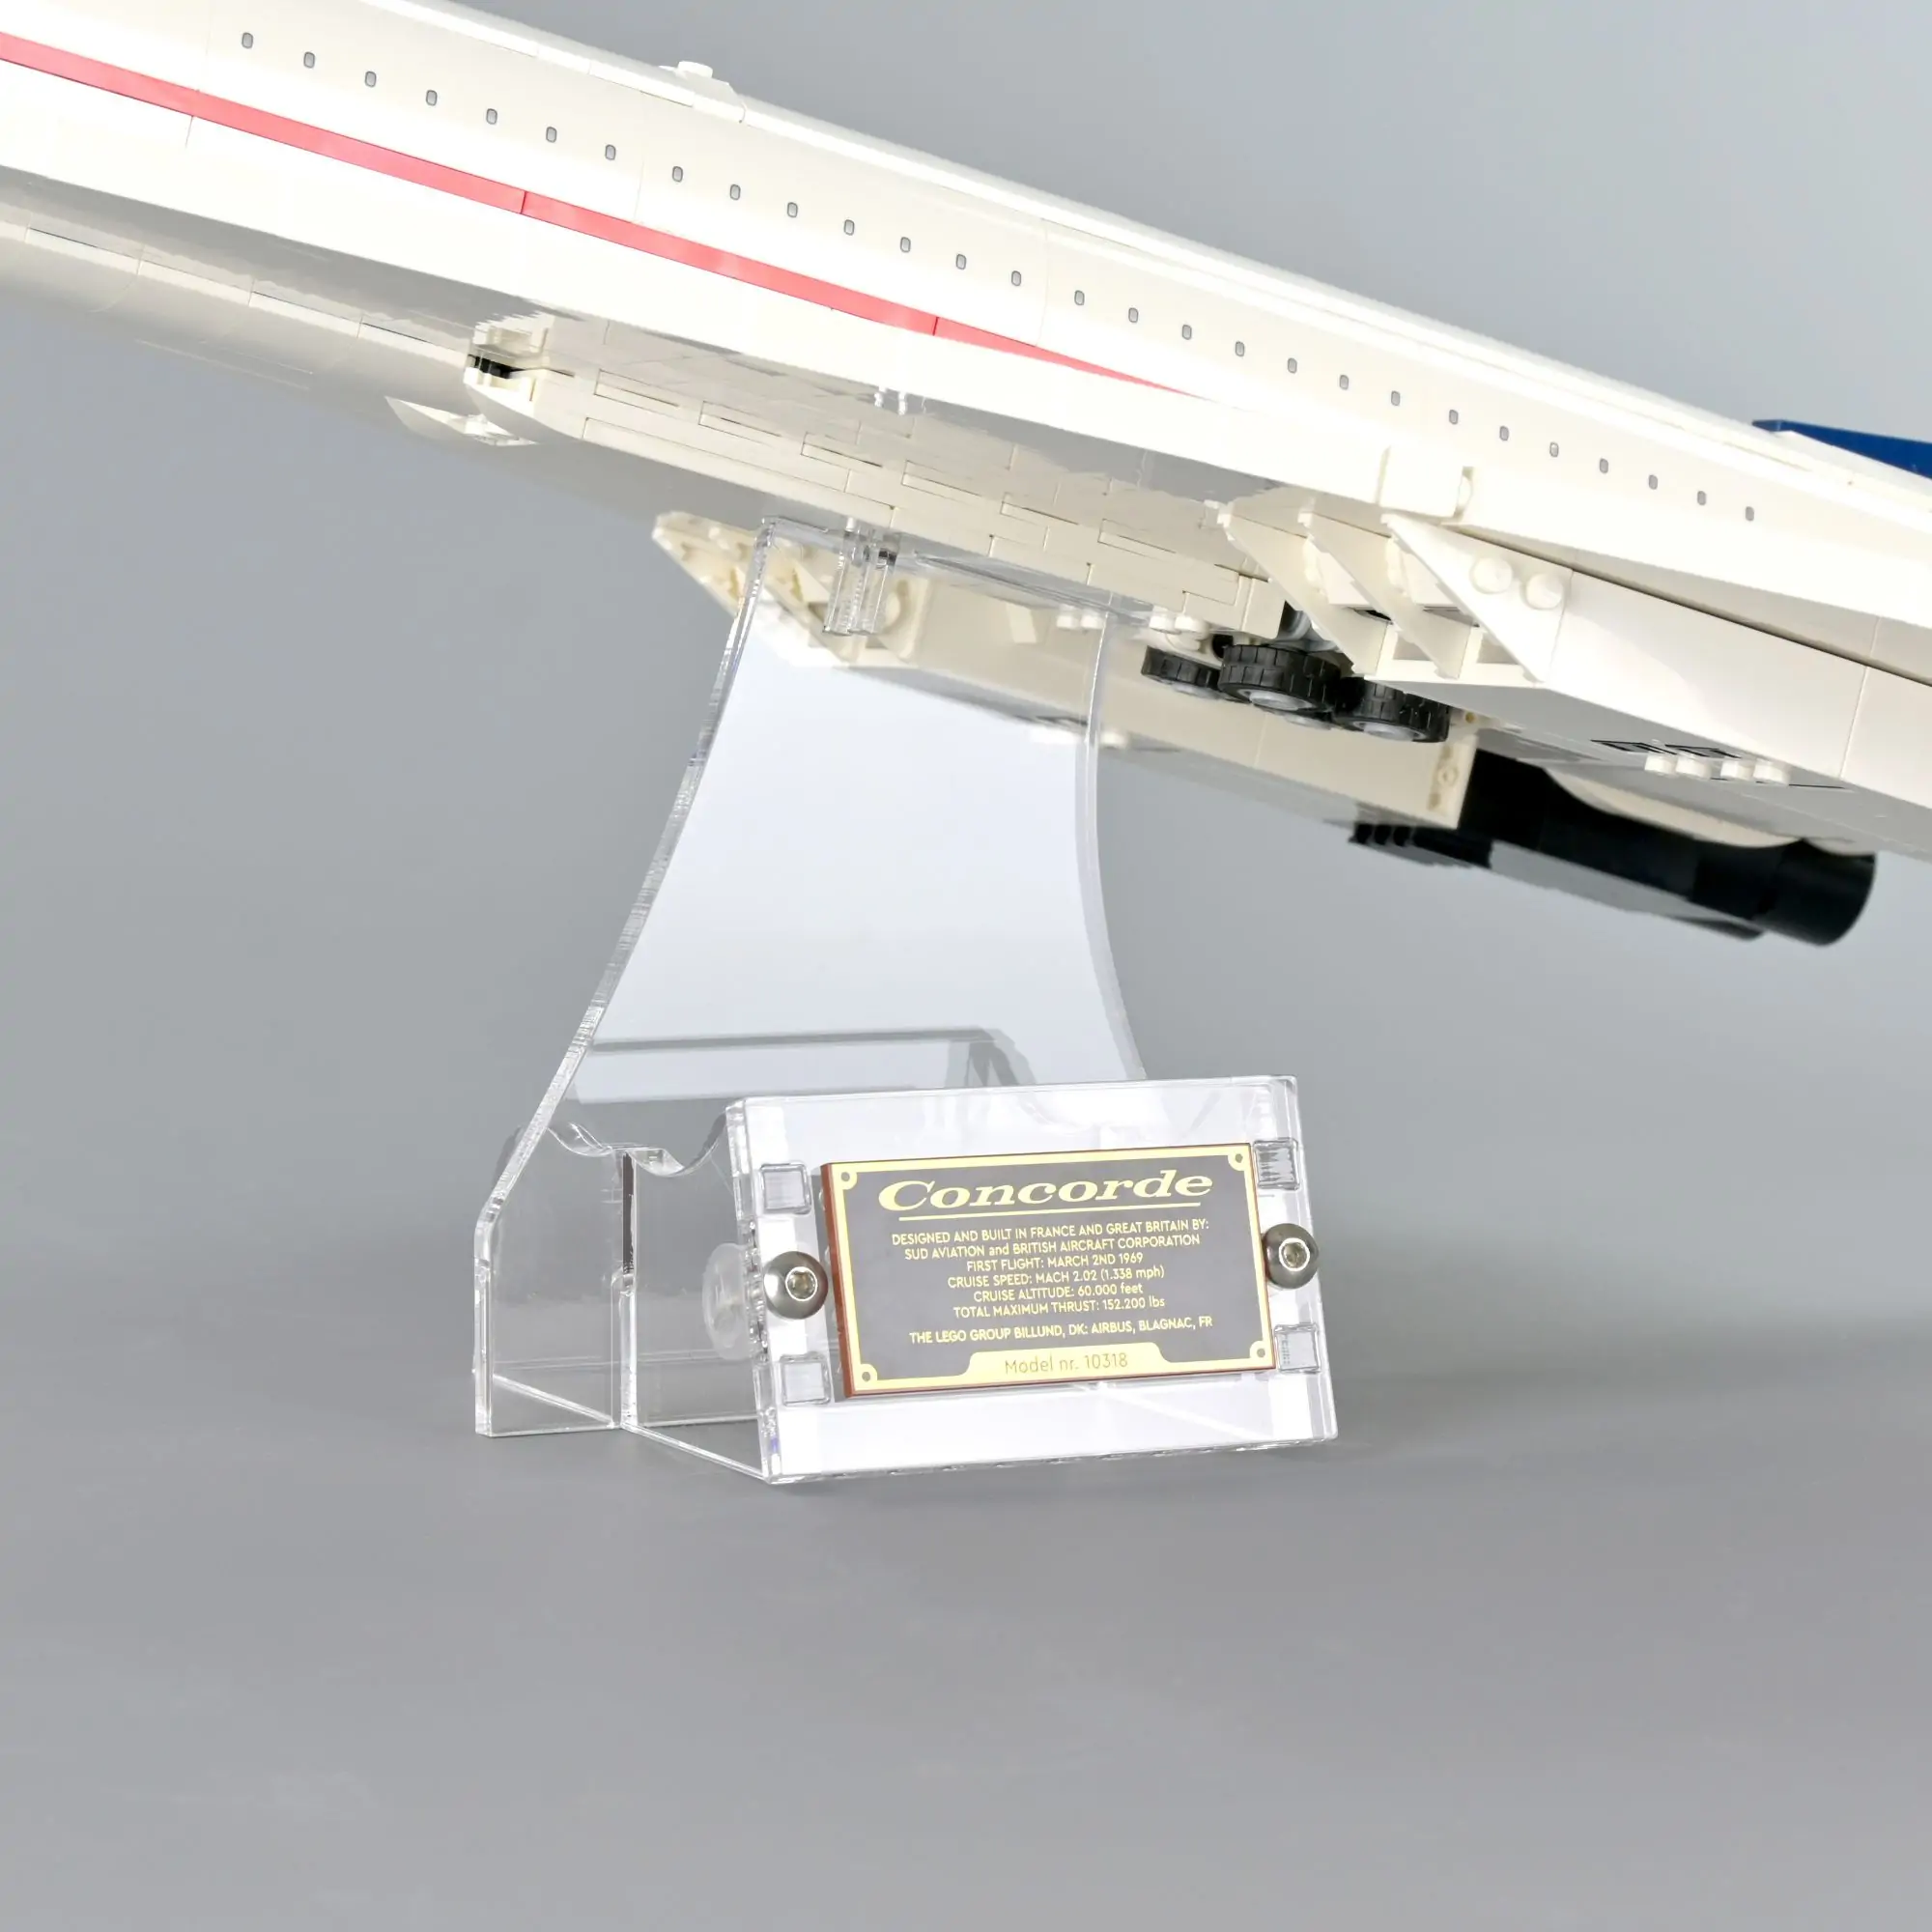 Acrylic Display Stand for LEGO Concorde